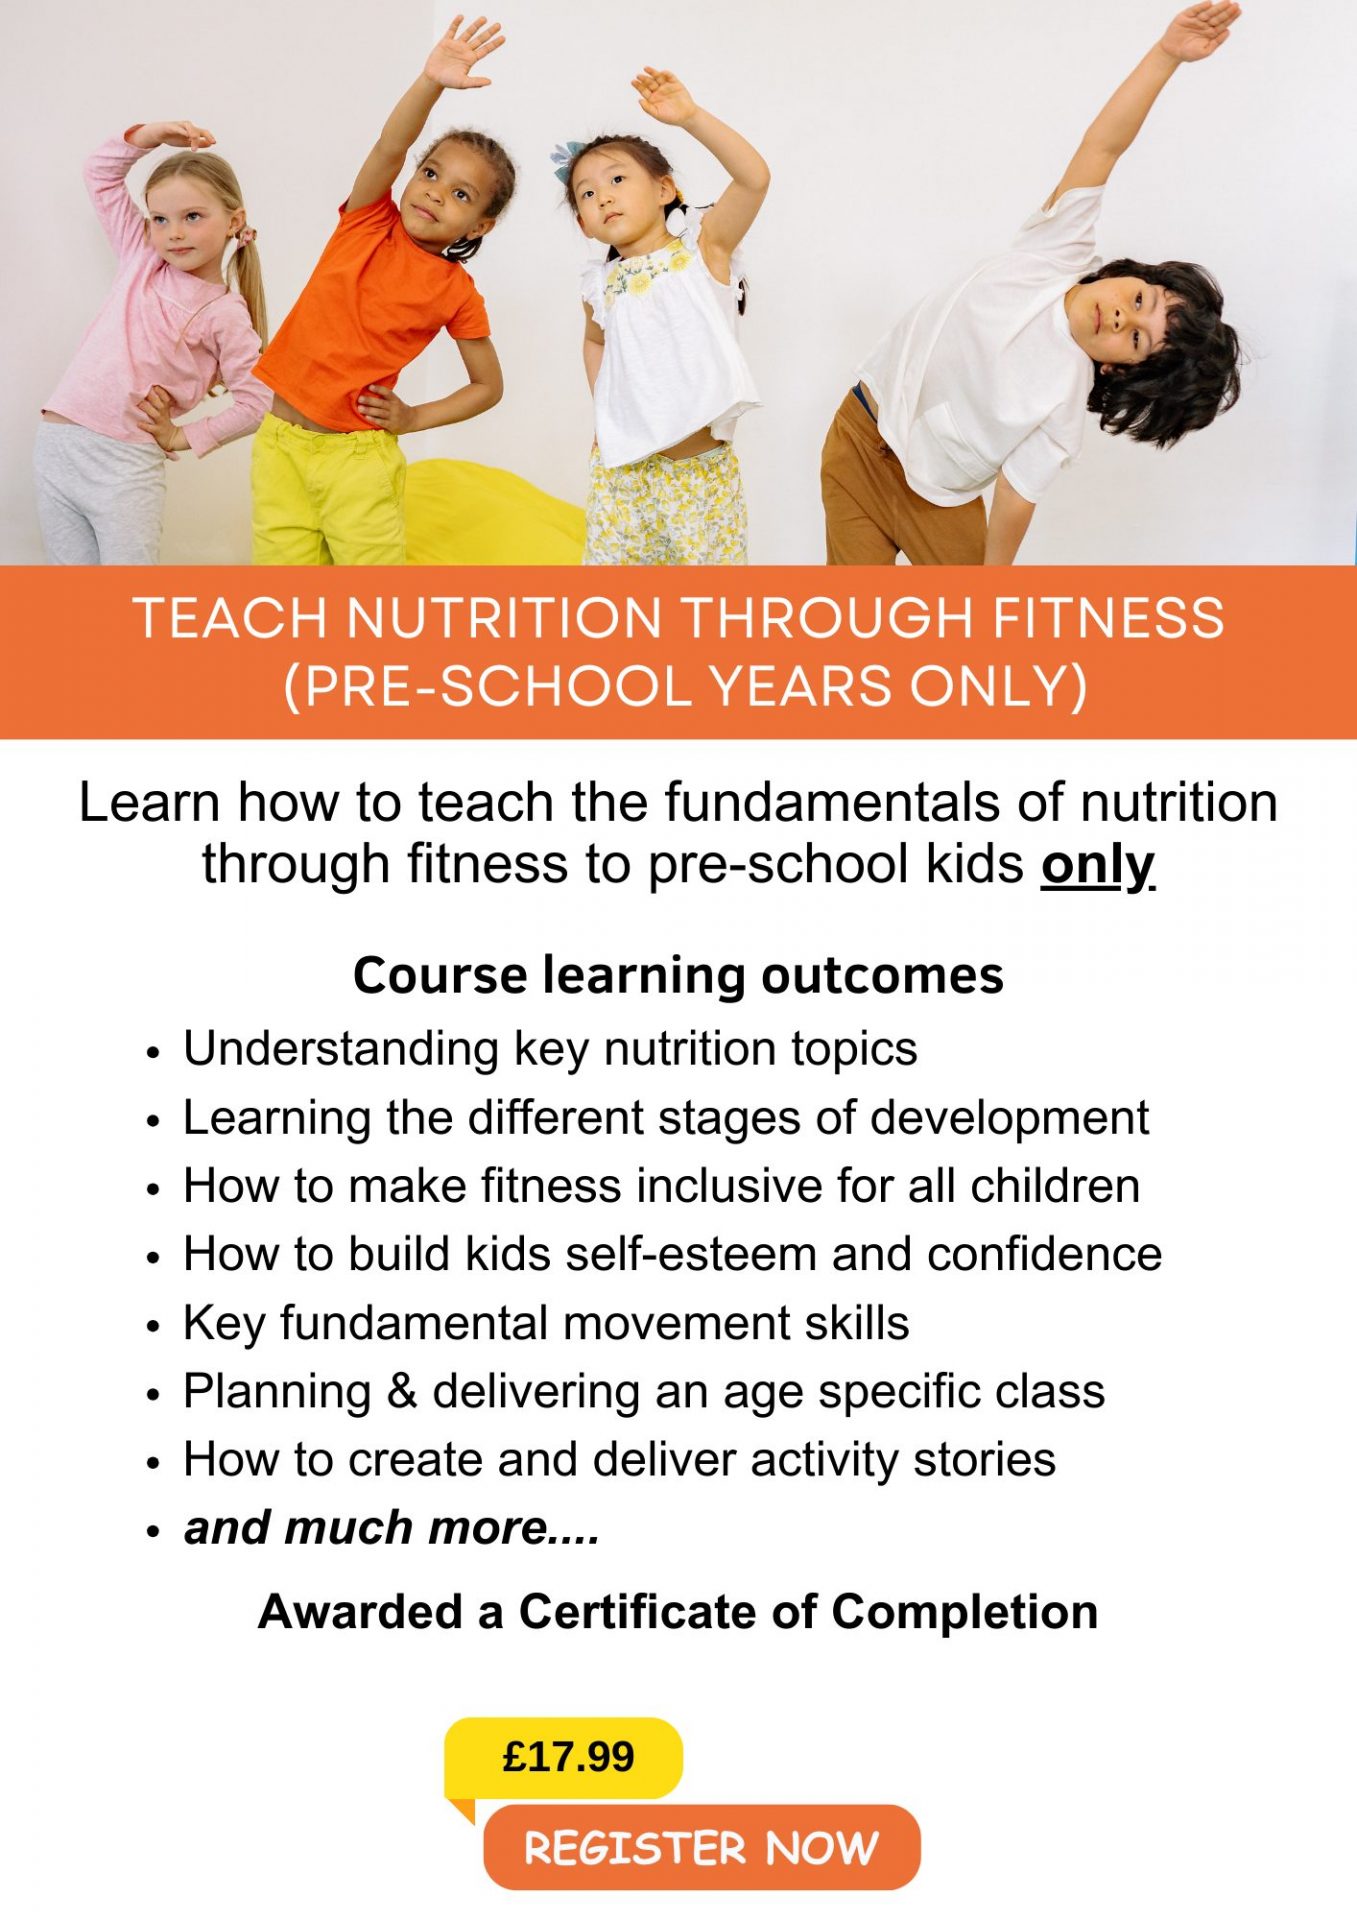 Early Years Online Course in fitness and nutrition